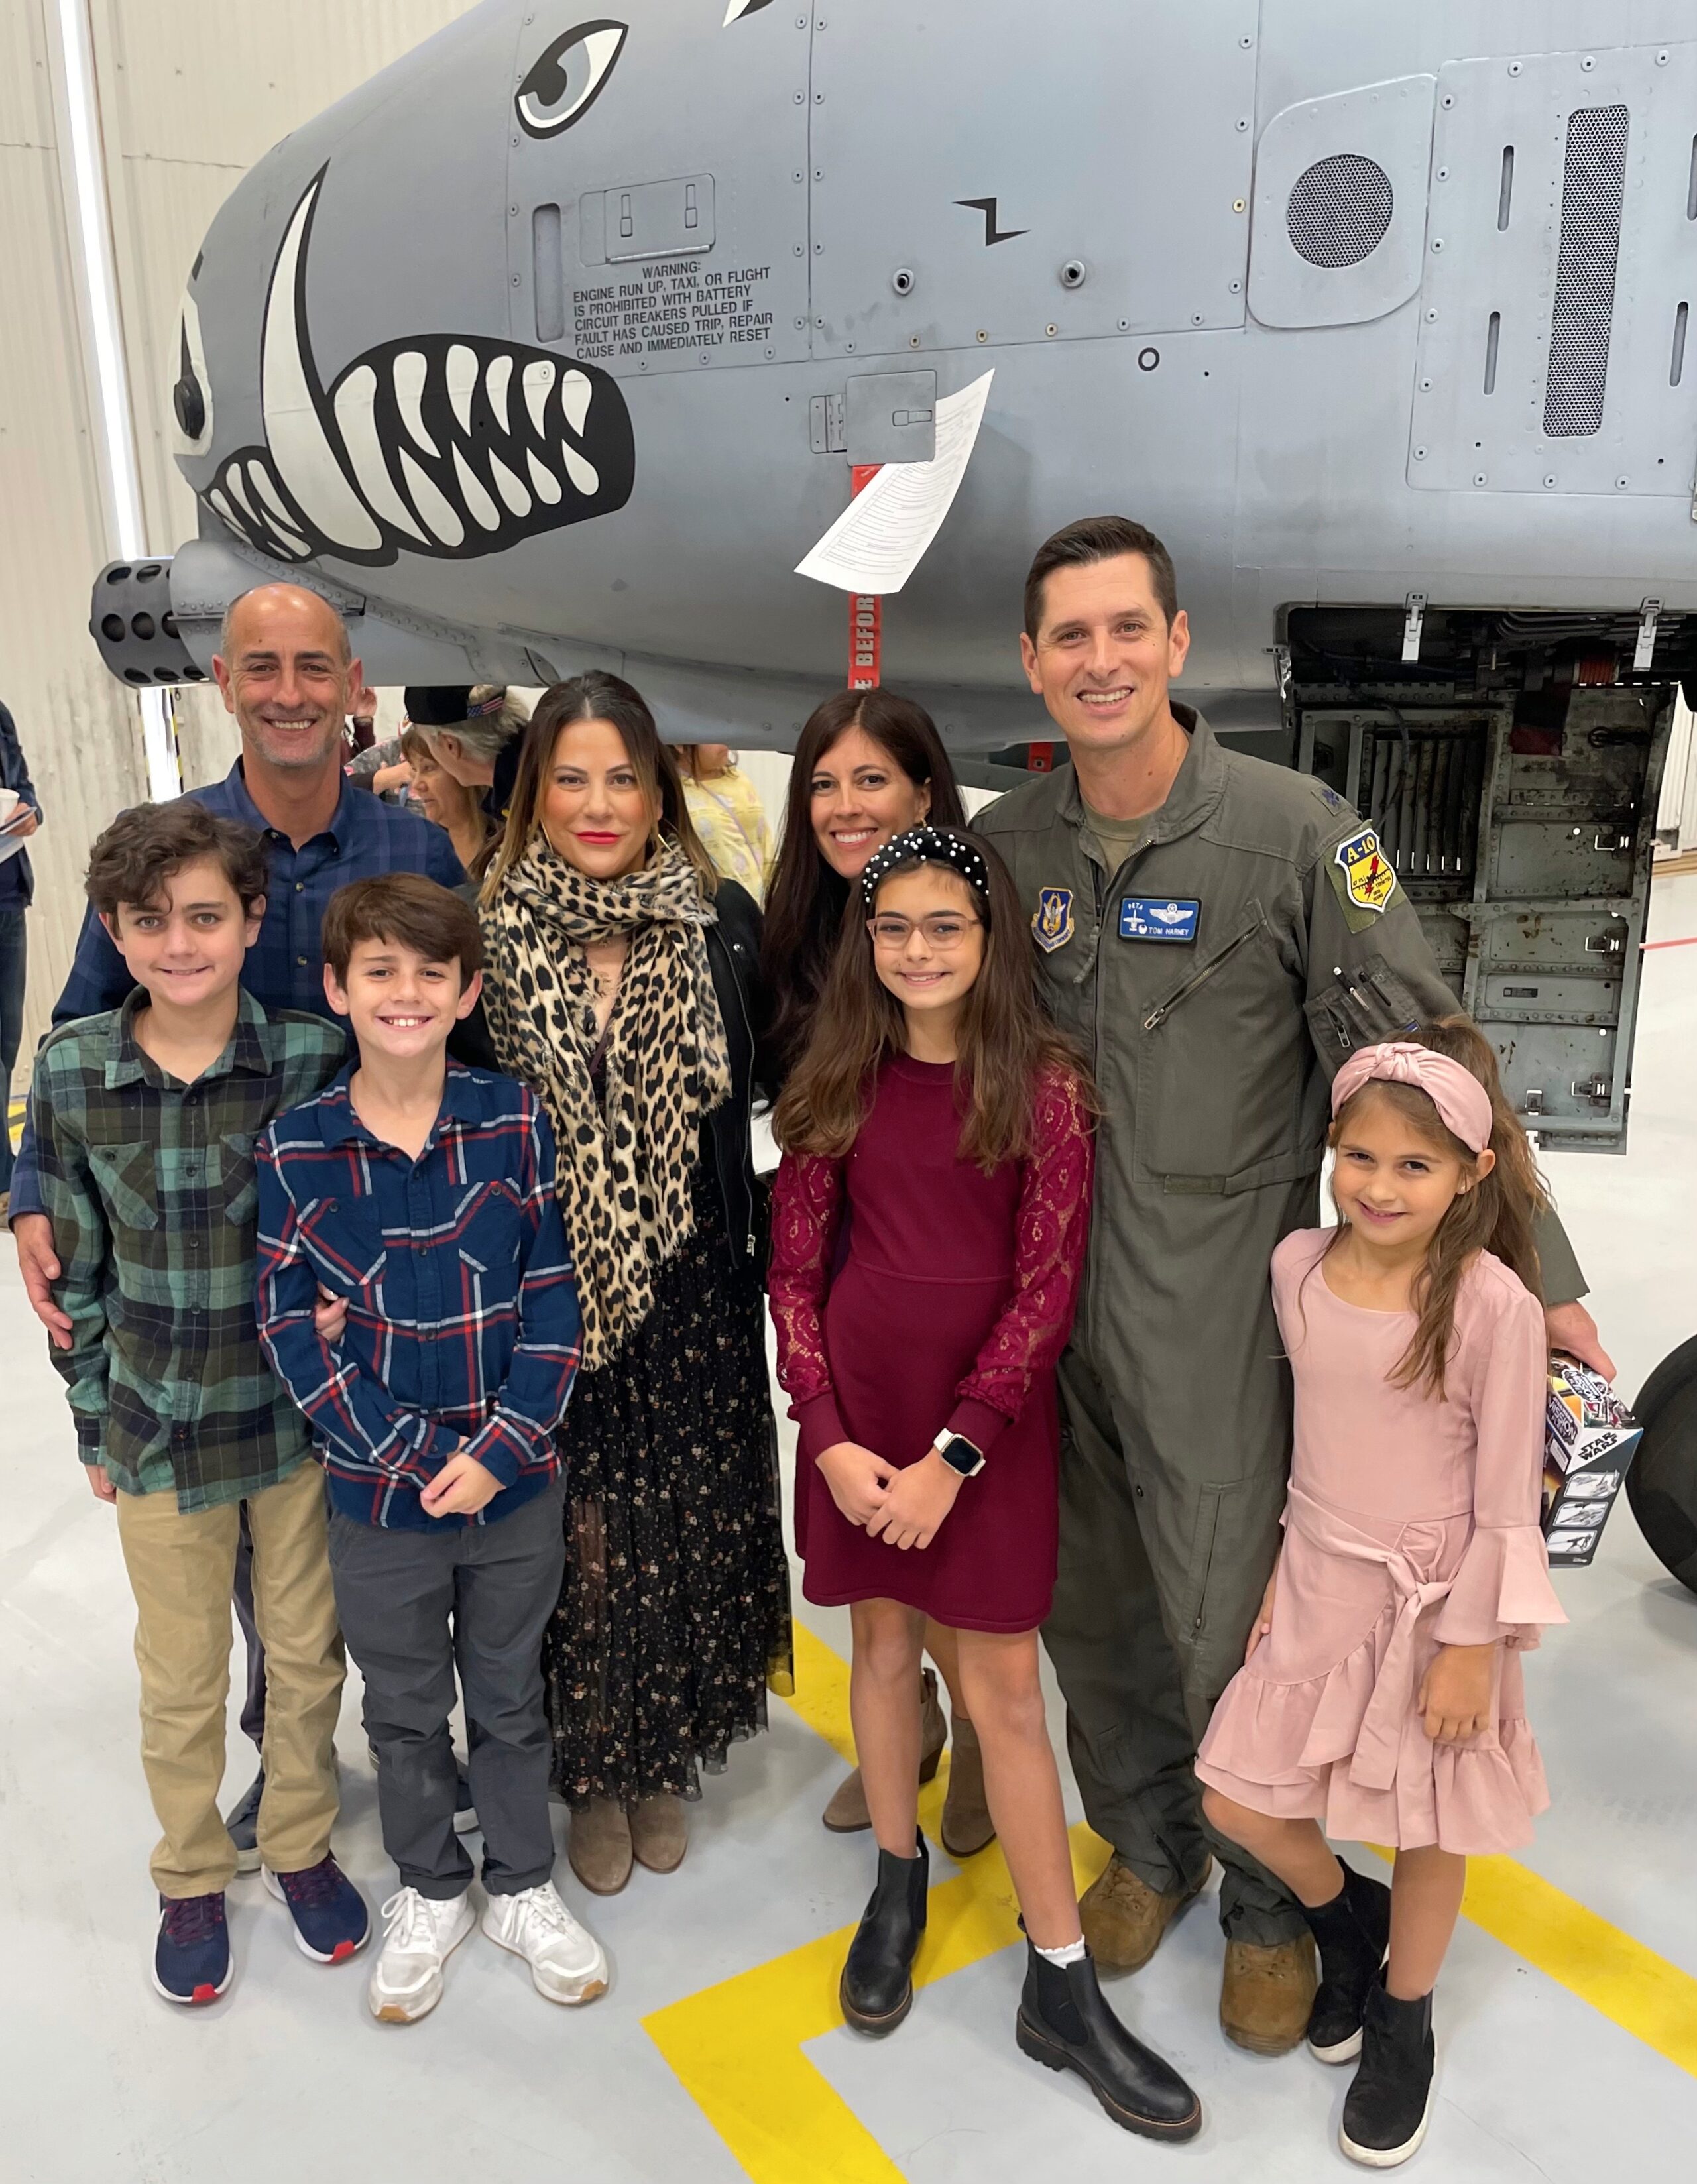 Pilot squadron commander with family